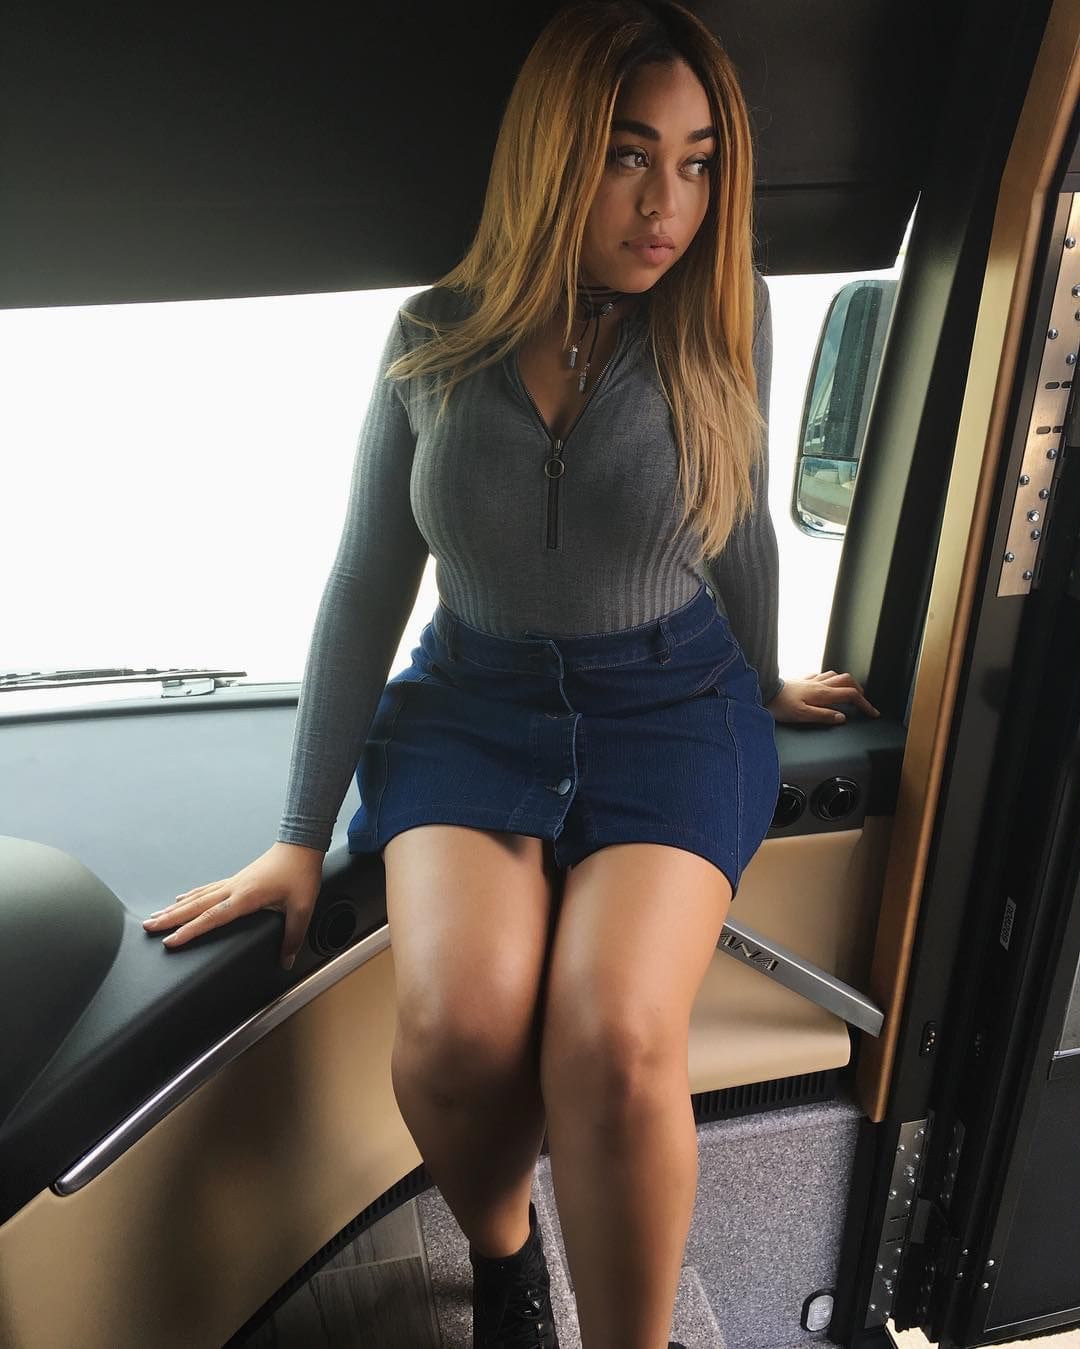 Jordyn Woods Is Serving Looks On The 'Gram In Pink Underwear And Fans Are Mesmerized By Her Curves - See Her Revealing Photos